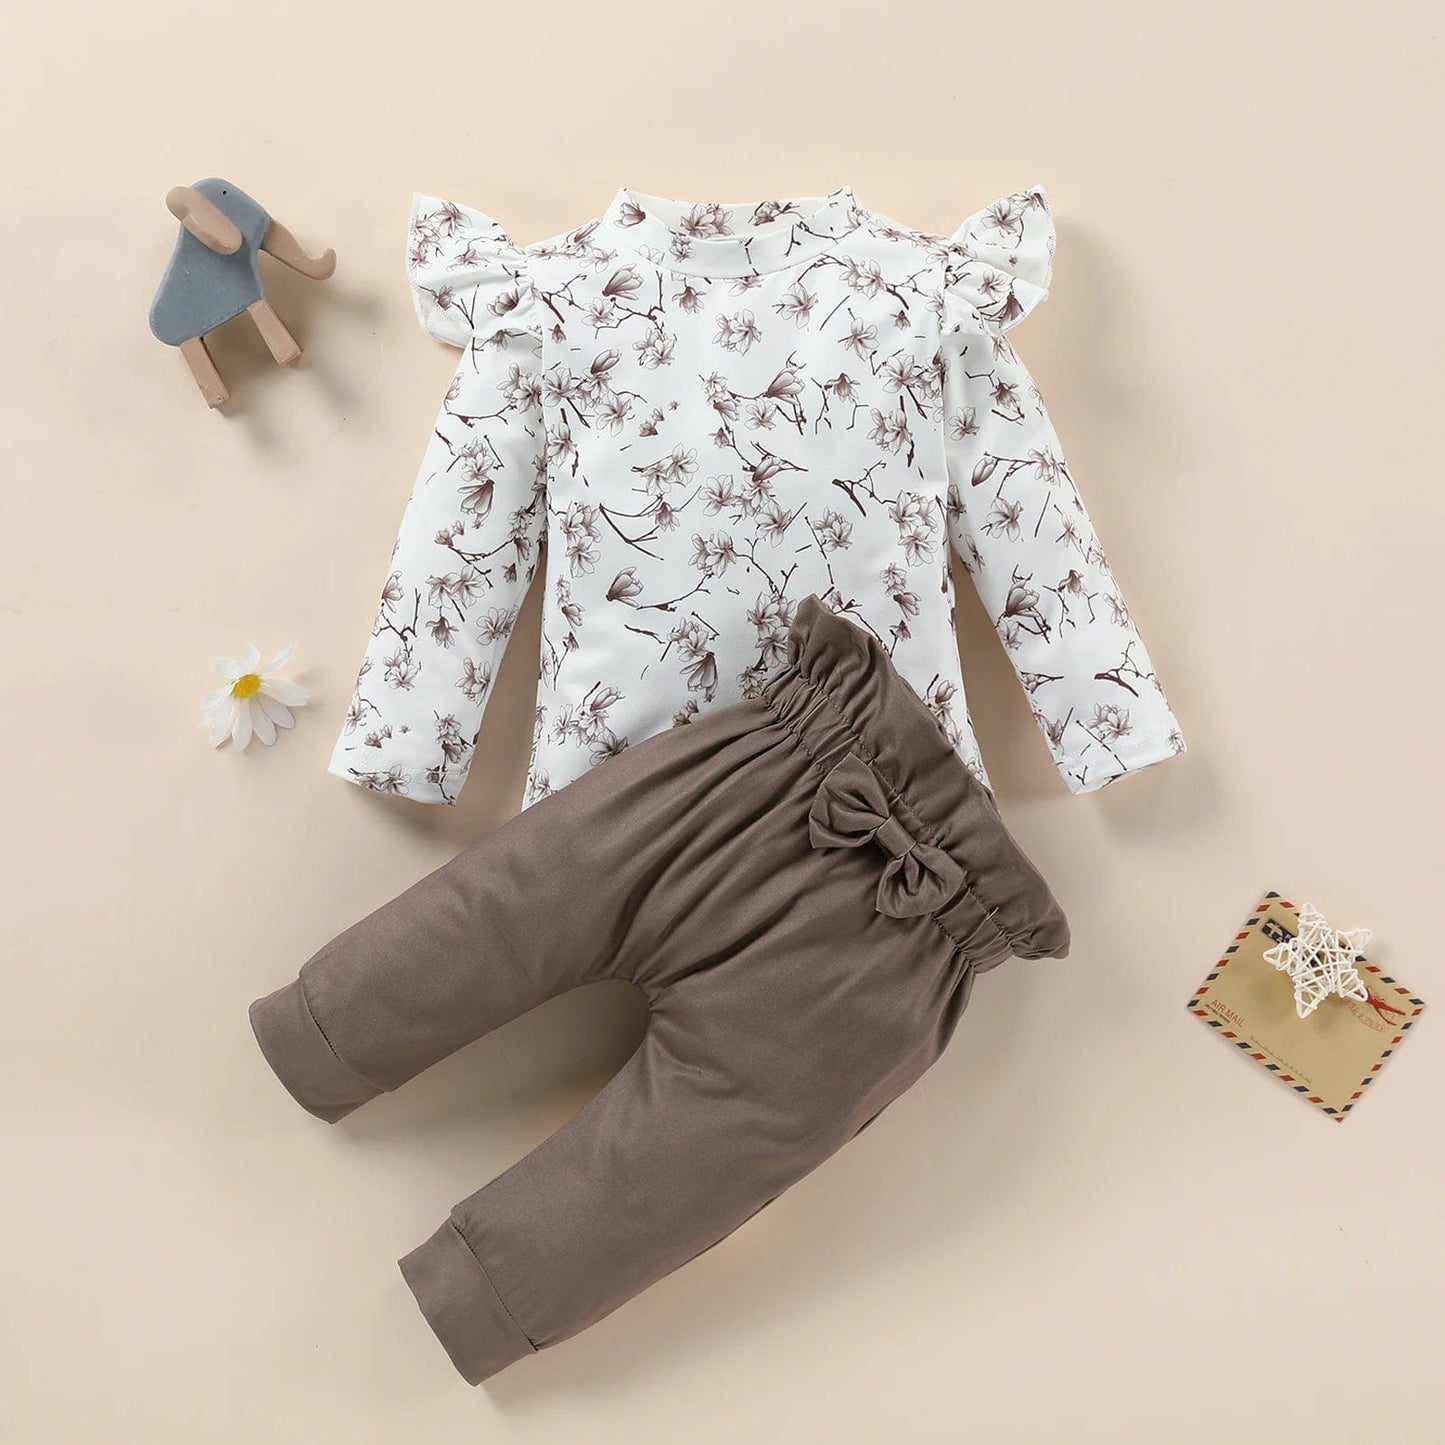 Newborn Baby Girl Clothes Set Fashion Floral Long Sleeve Pullover Top Solid Bow Long Pants Toddler Infant Autumn Outfit